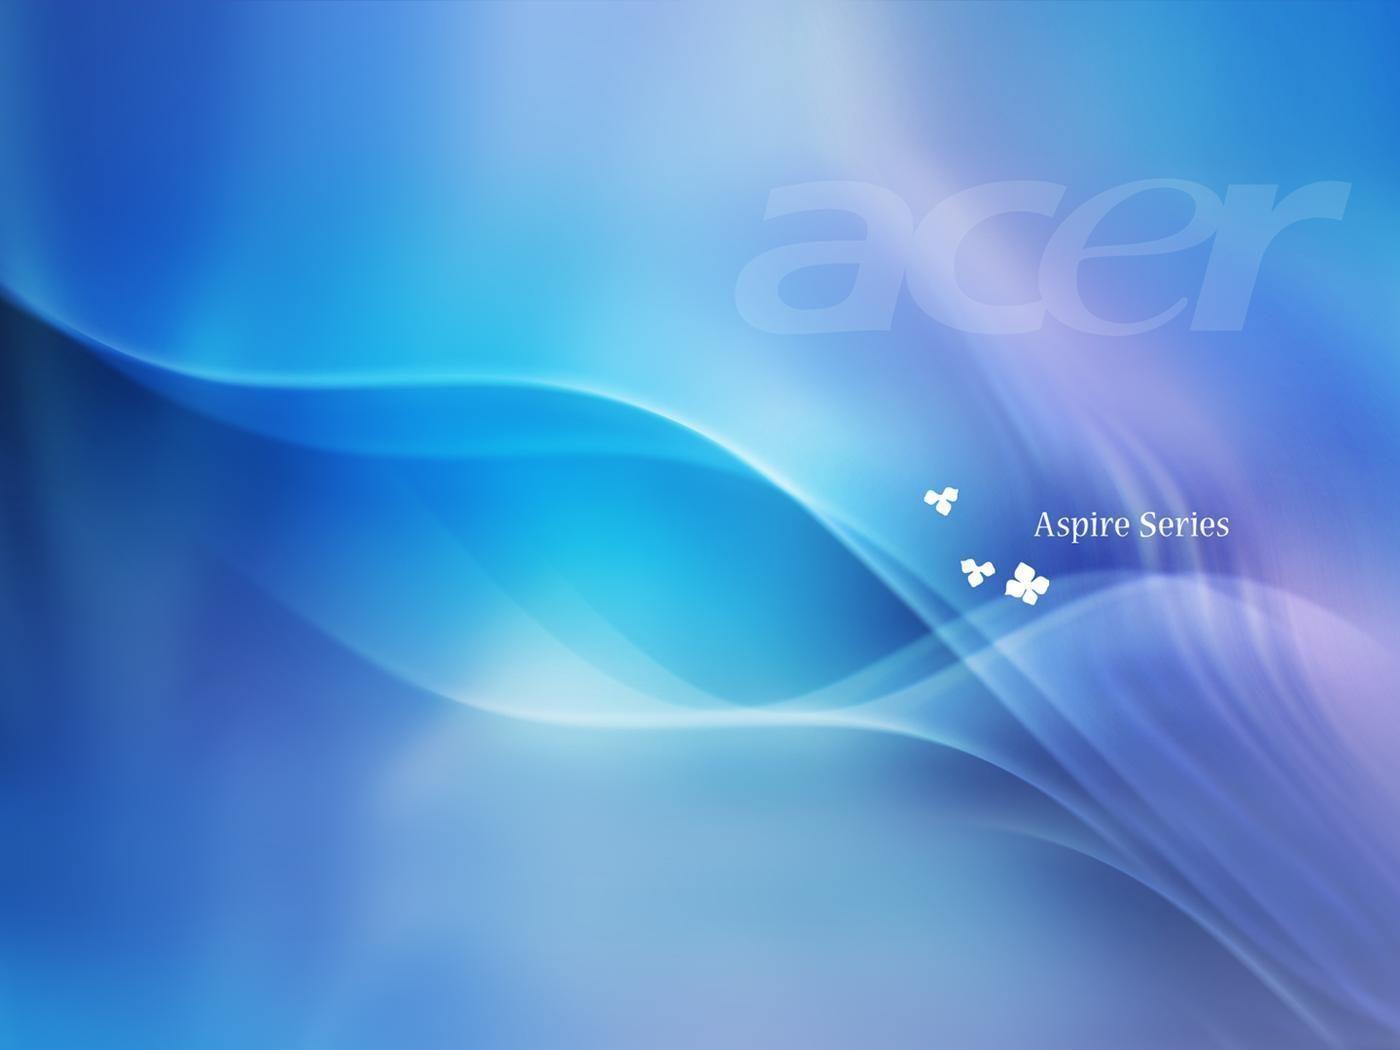 Acer Wallpaper. PC Doctor Ardee